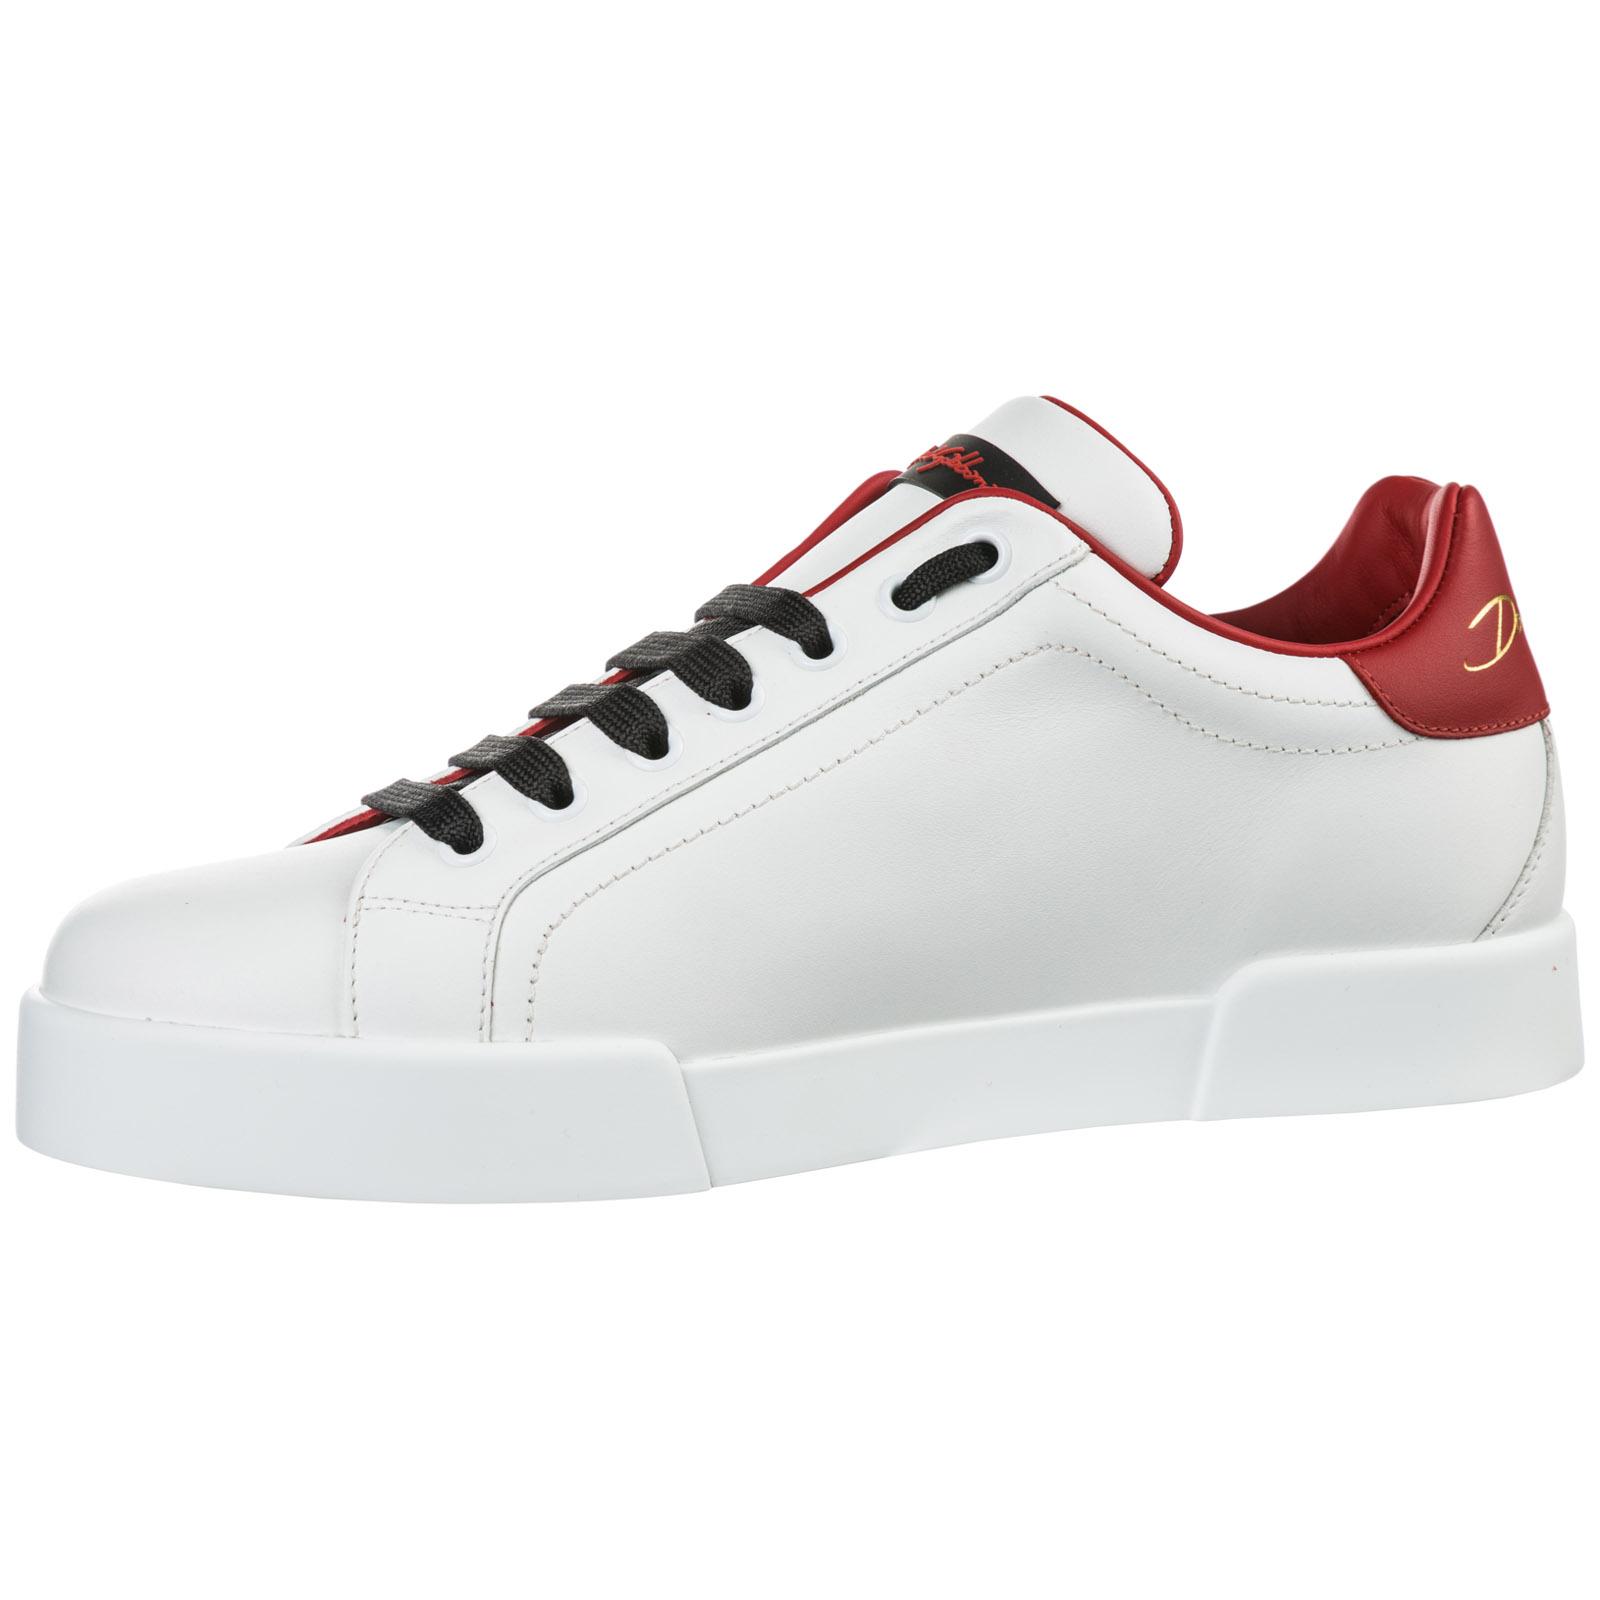 Dolce & Gabbana Shoes Leather Trainers Sneakers Portofino for Men 